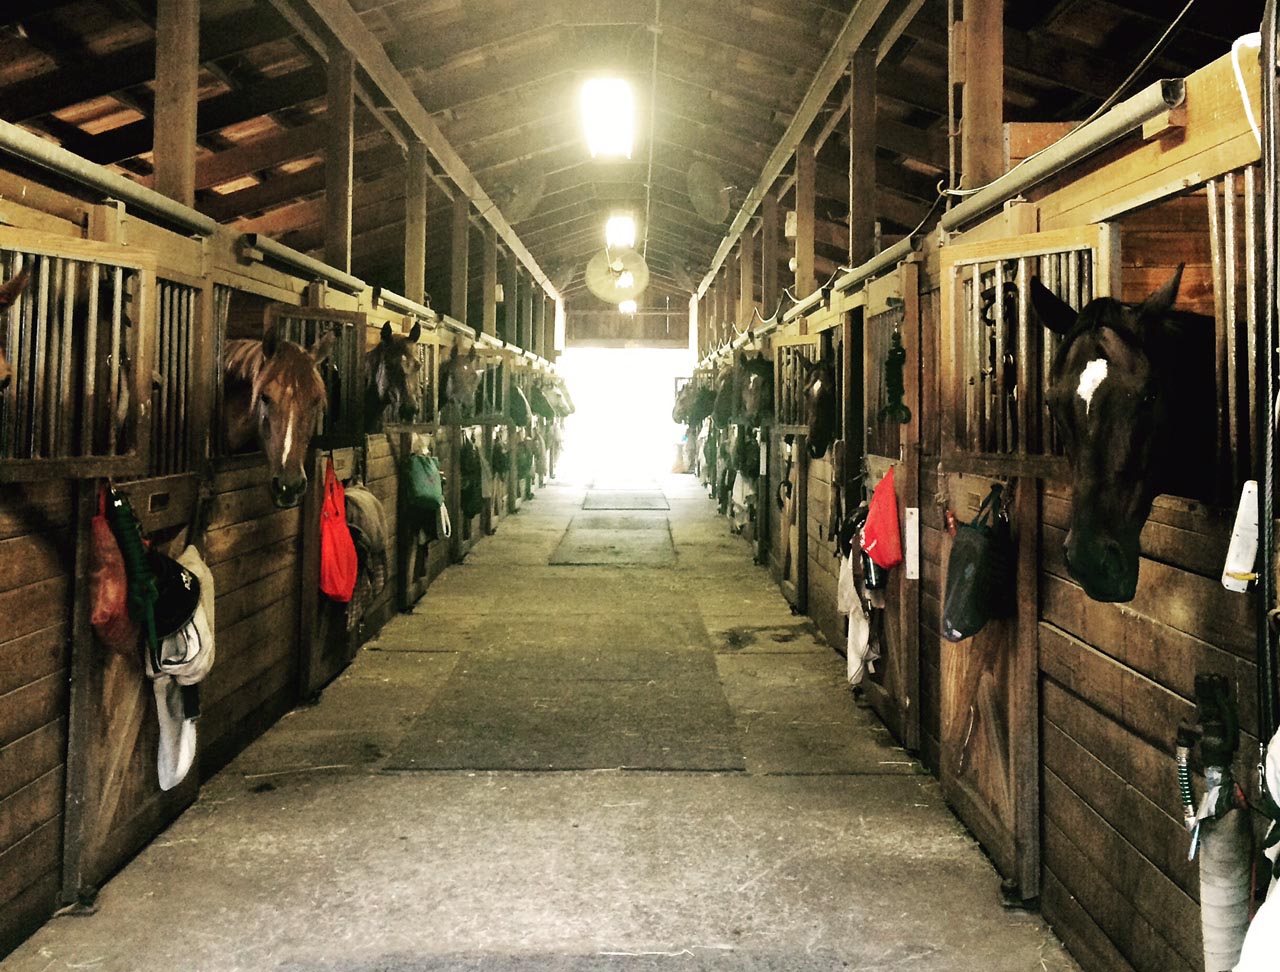 Horses in the barn at feeding time